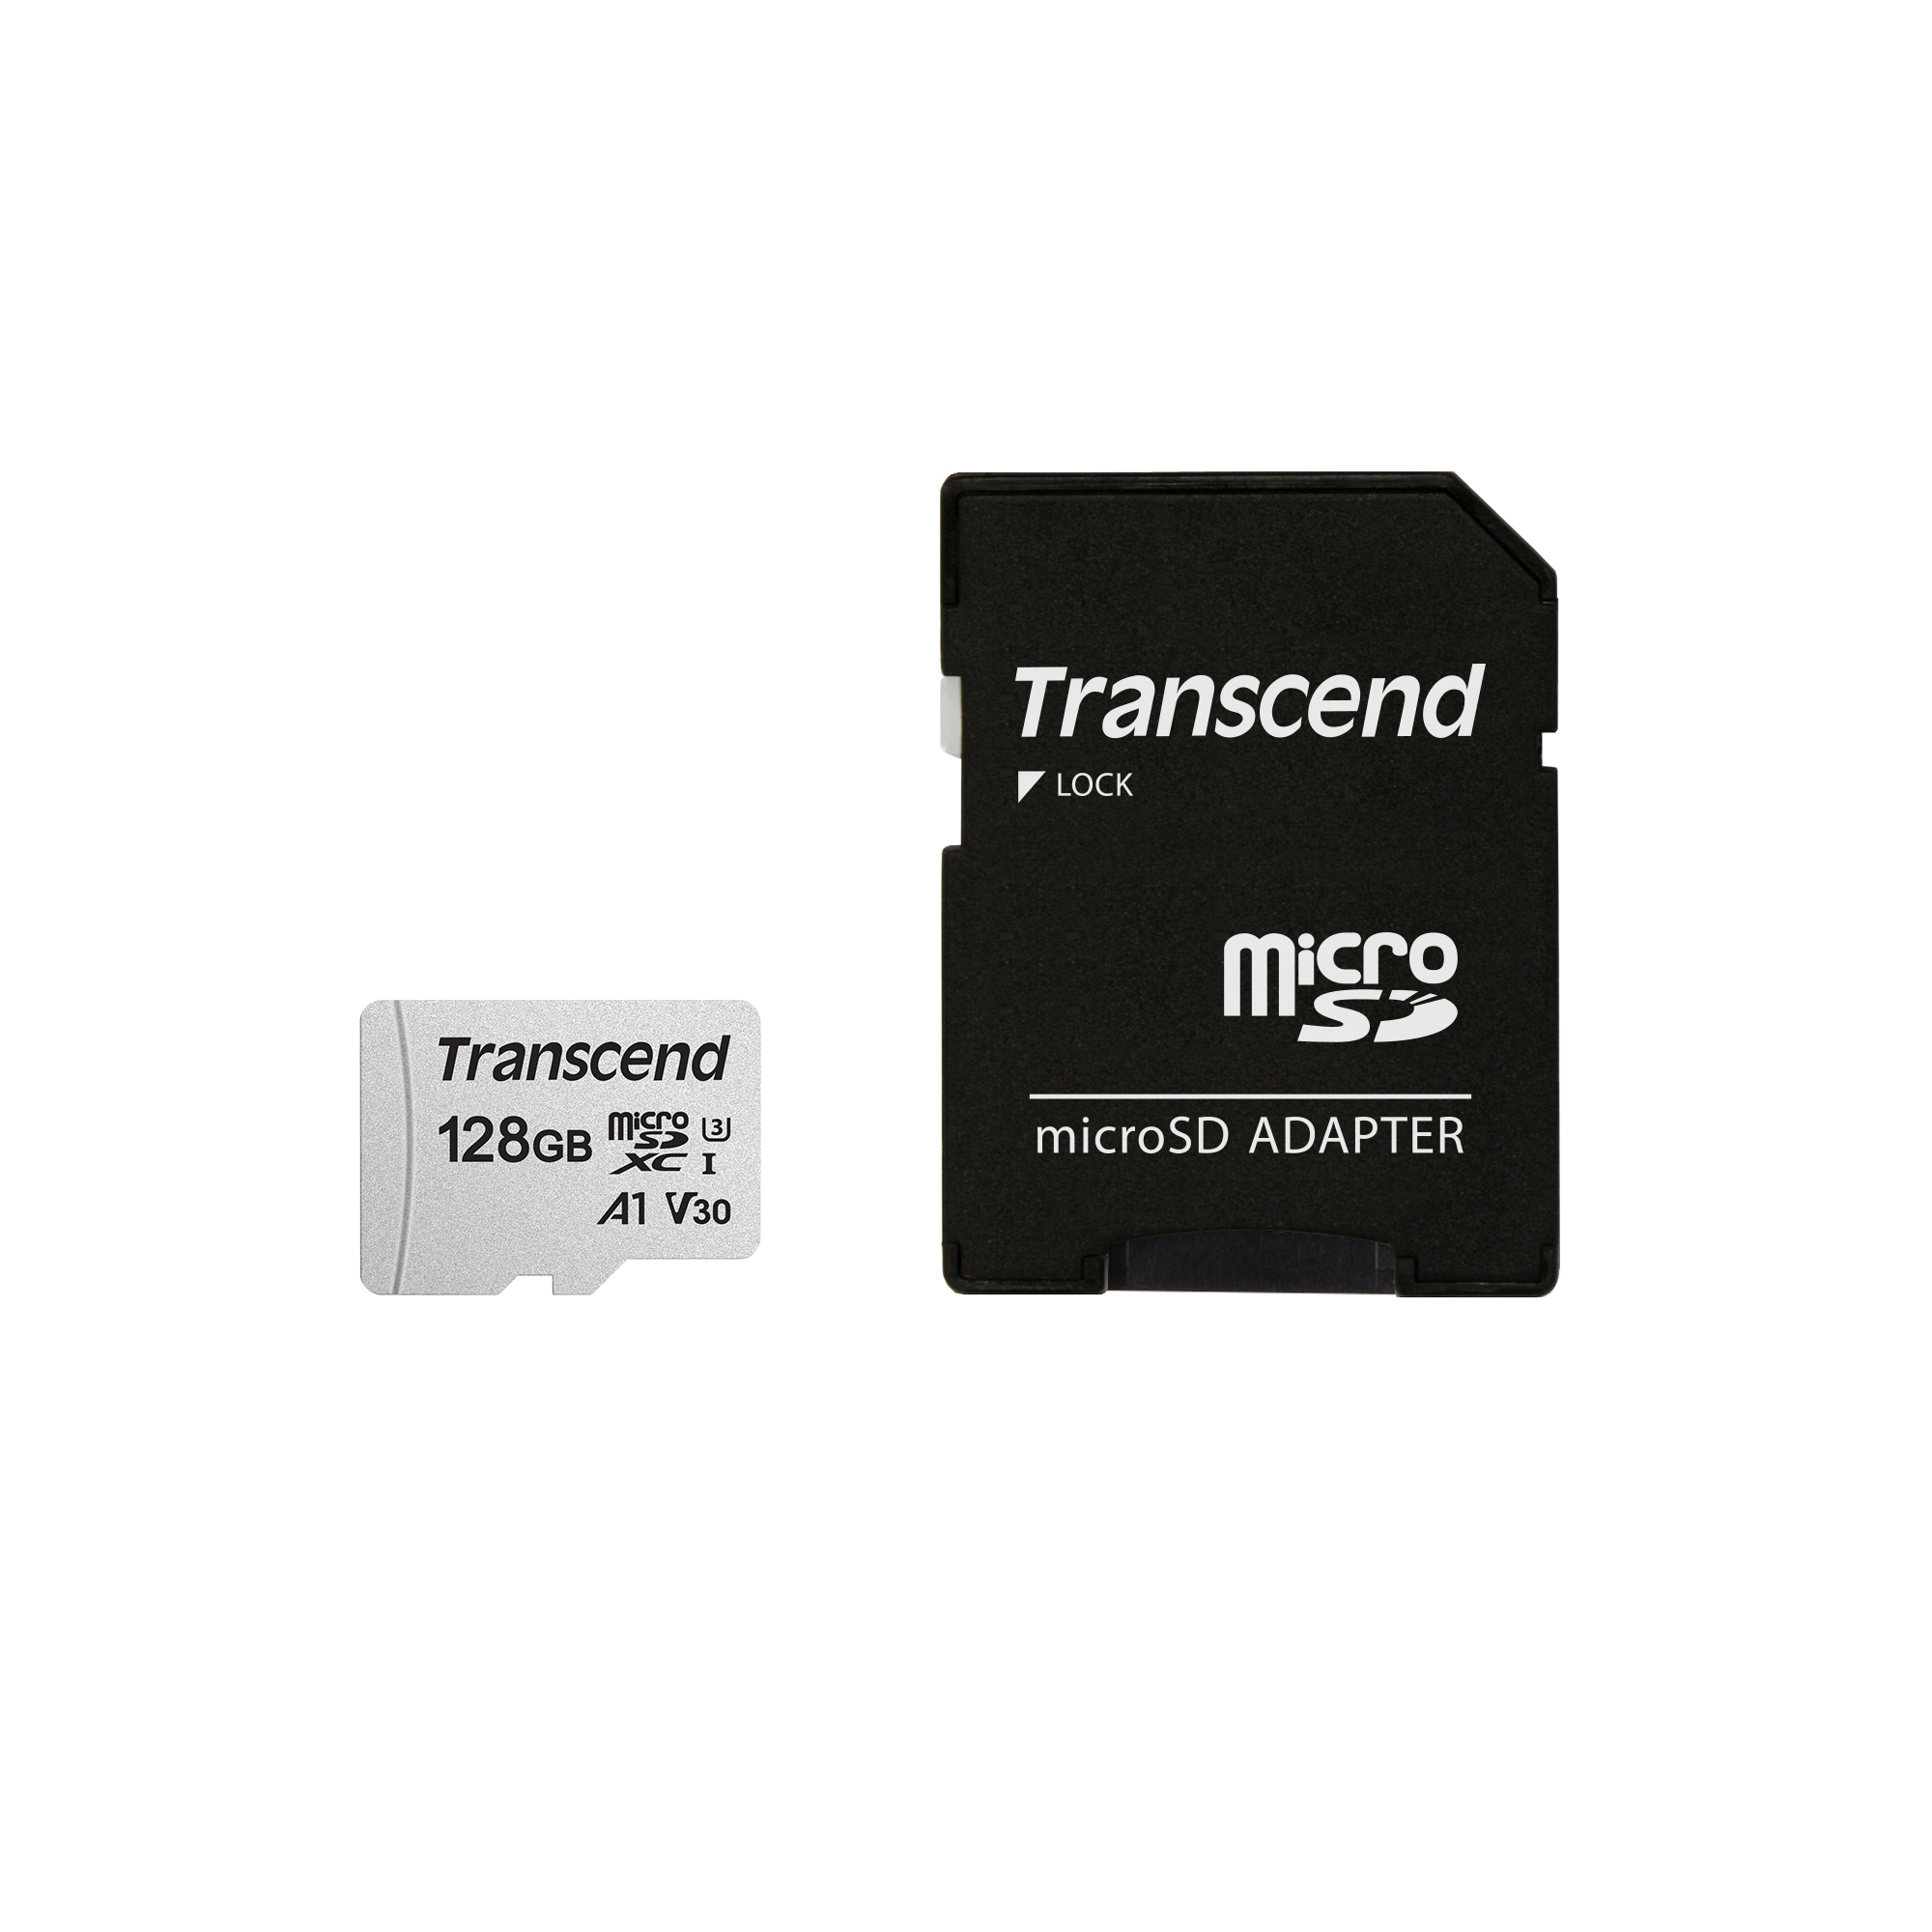  128GB UHS-I U3A1 microSD with Adapter